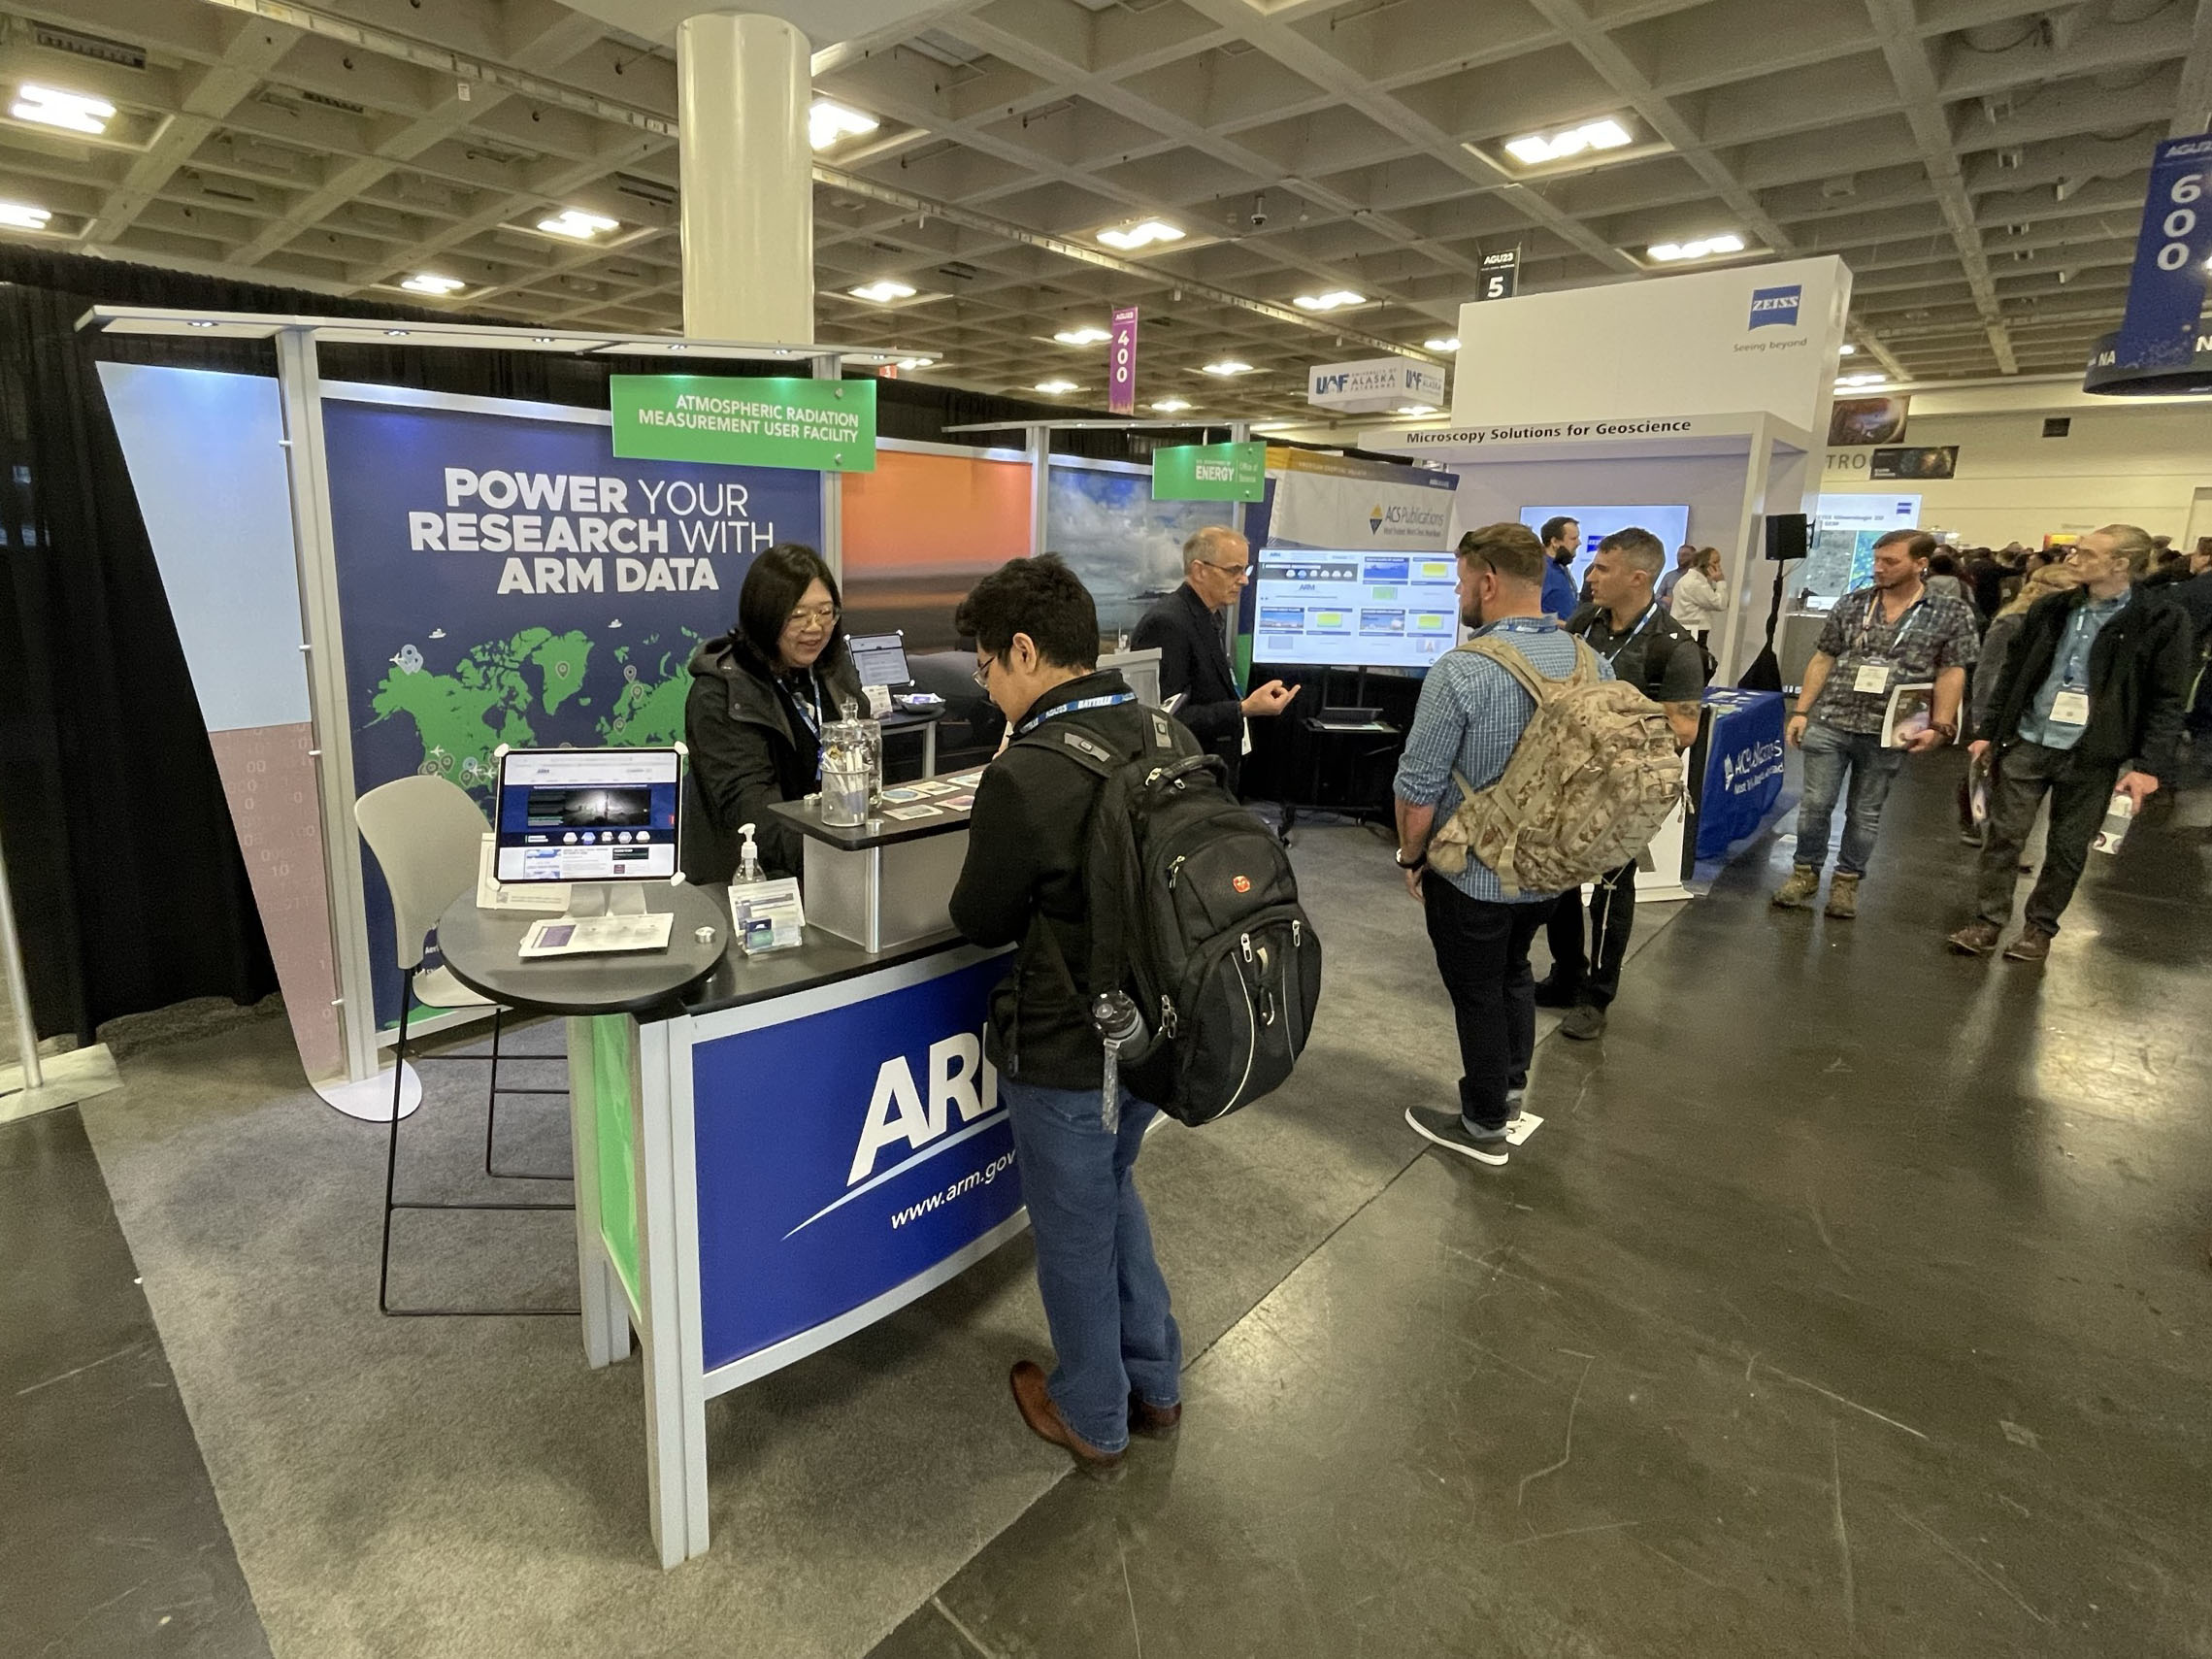 Visitors come to get information at the ARM booth, which includes text saying, "Power your research with ARM data."